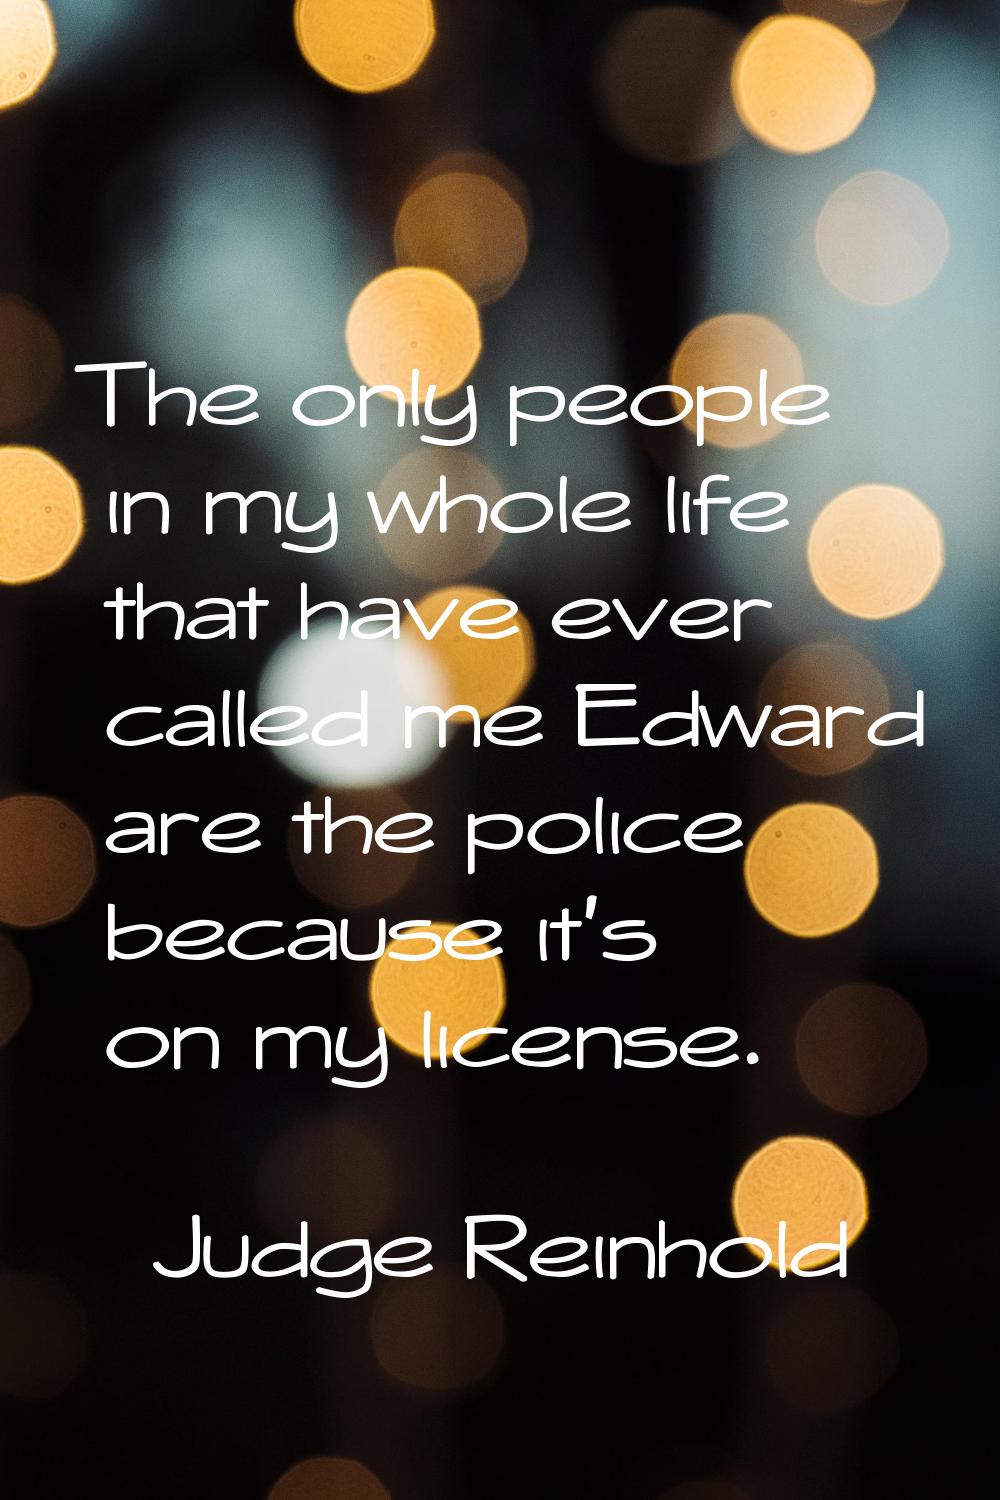 The only people in my whole life that have ever called me Edward are the police because it's on my 